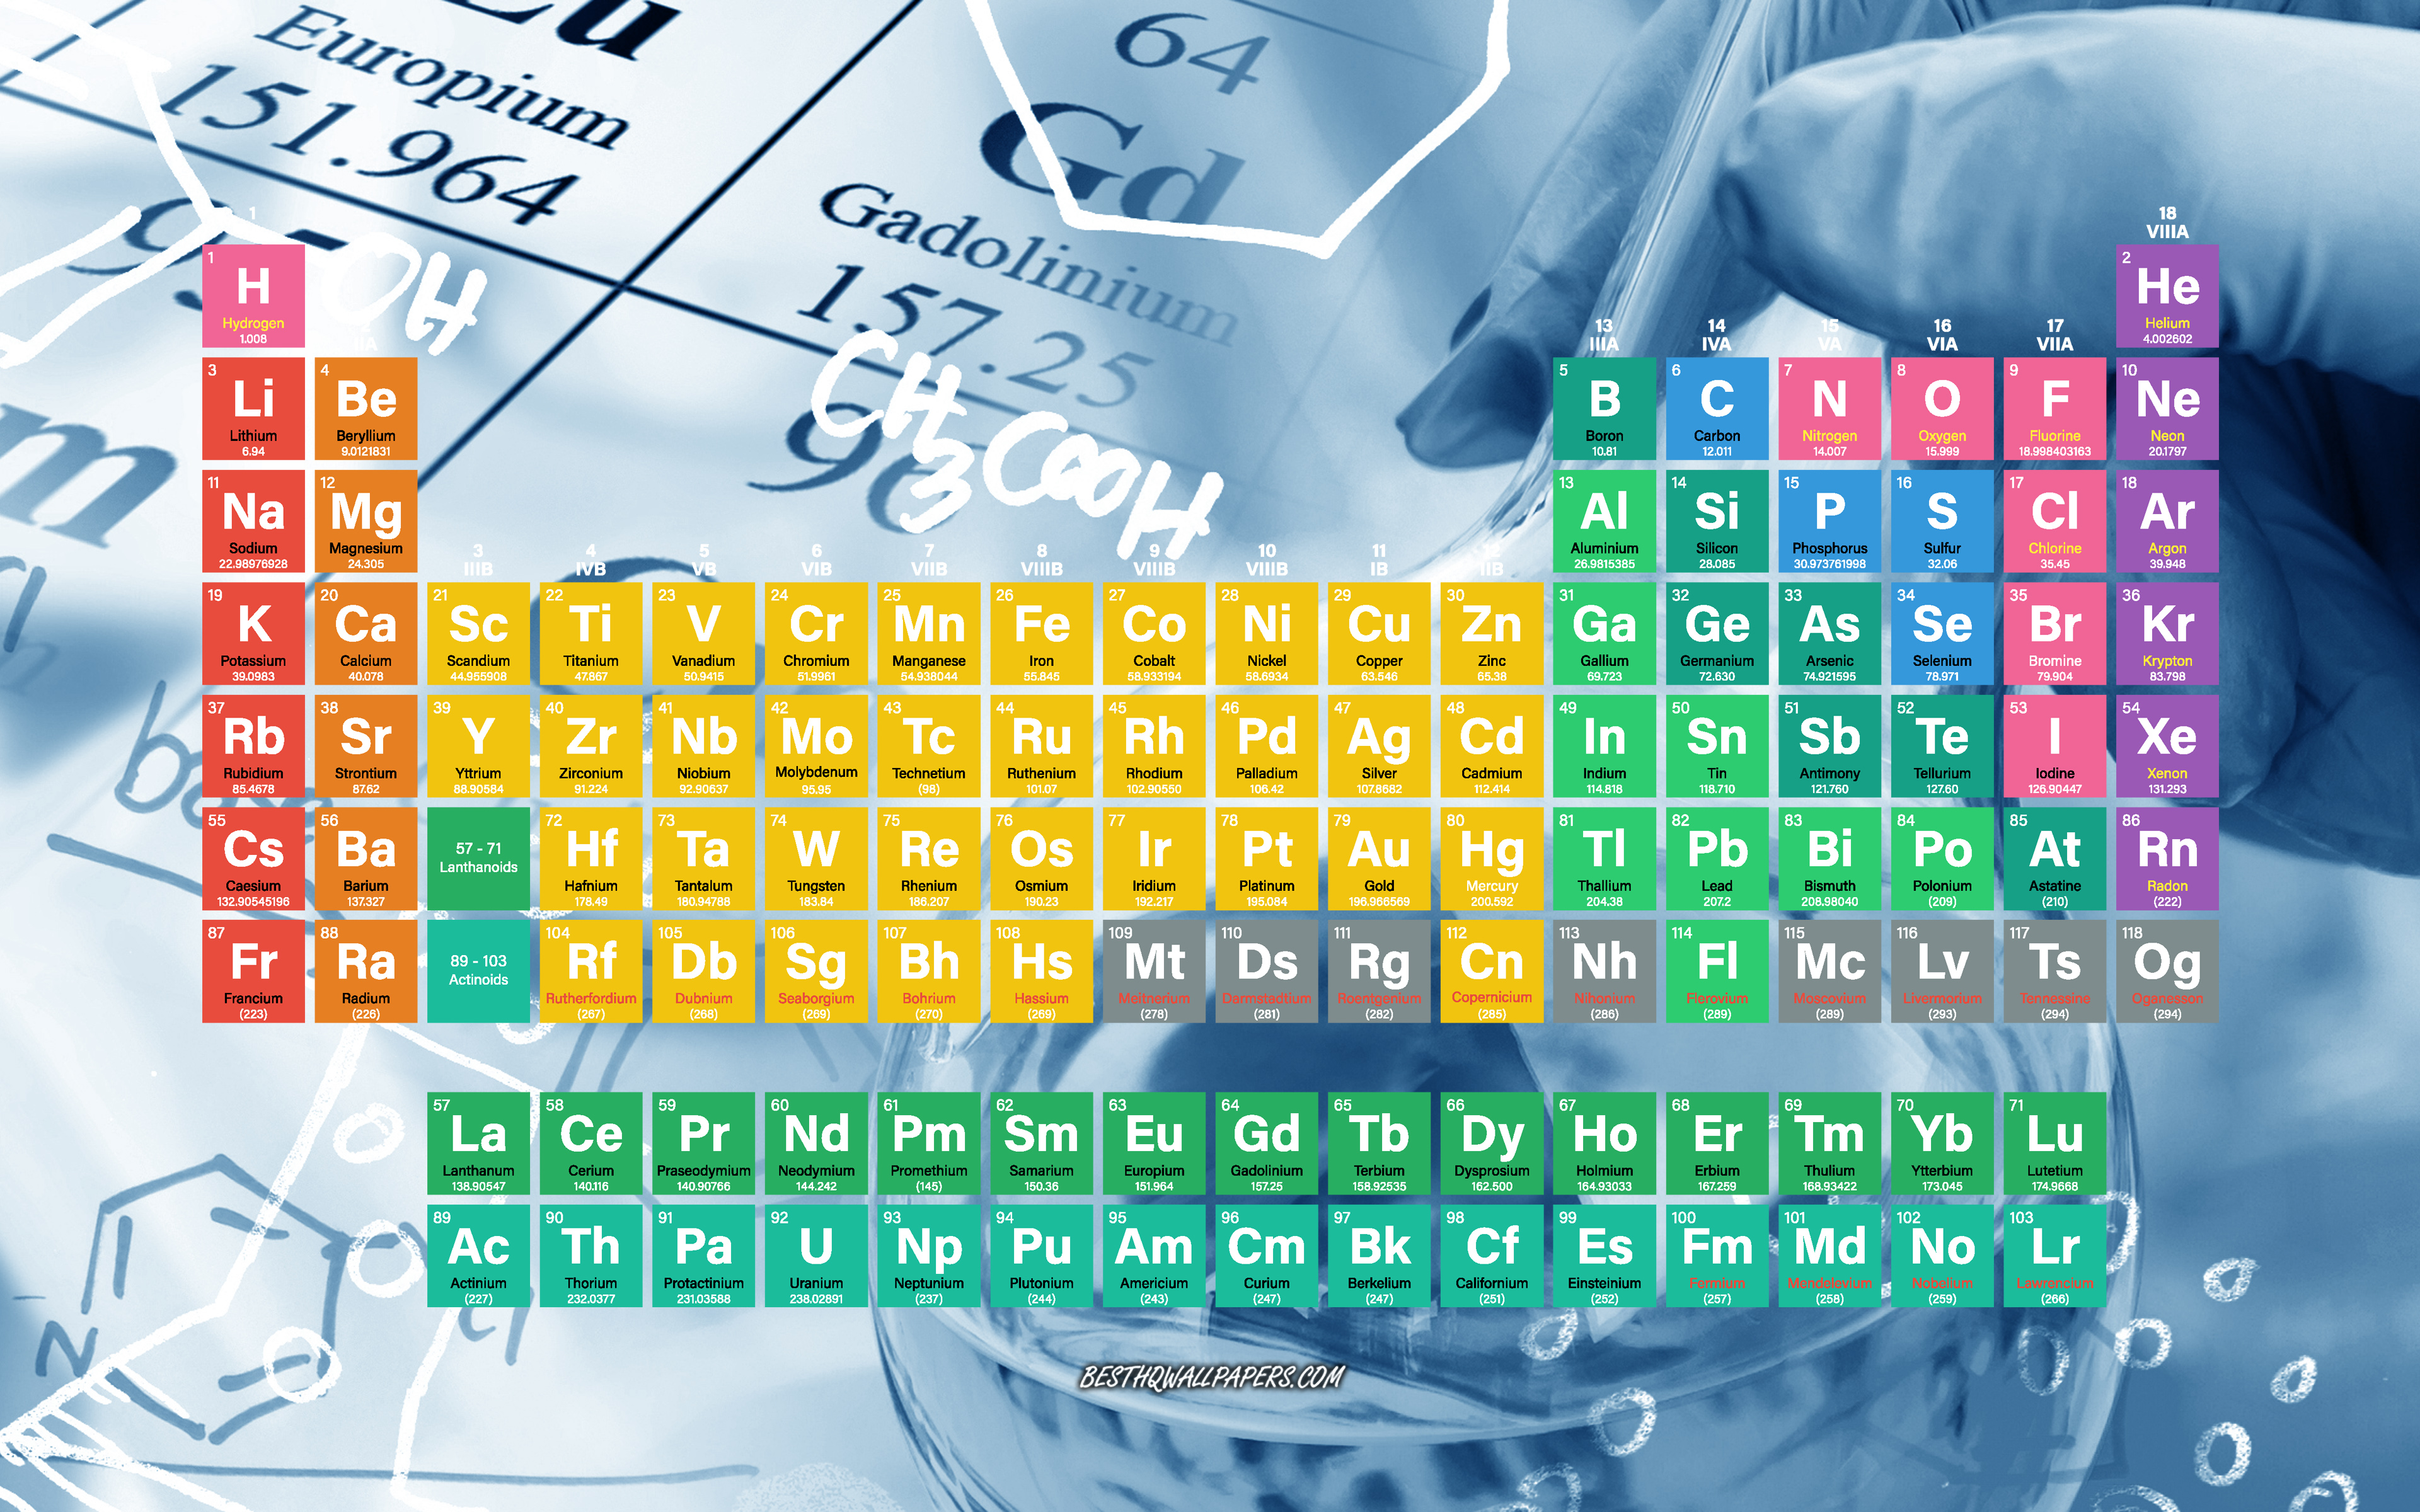 Download wallpaper Periodic table, chemistry background, chemical elements, chemistry concepts, periodic table of elements for desktop with resolution 3840x2400. High Quality HD picture wallpaper